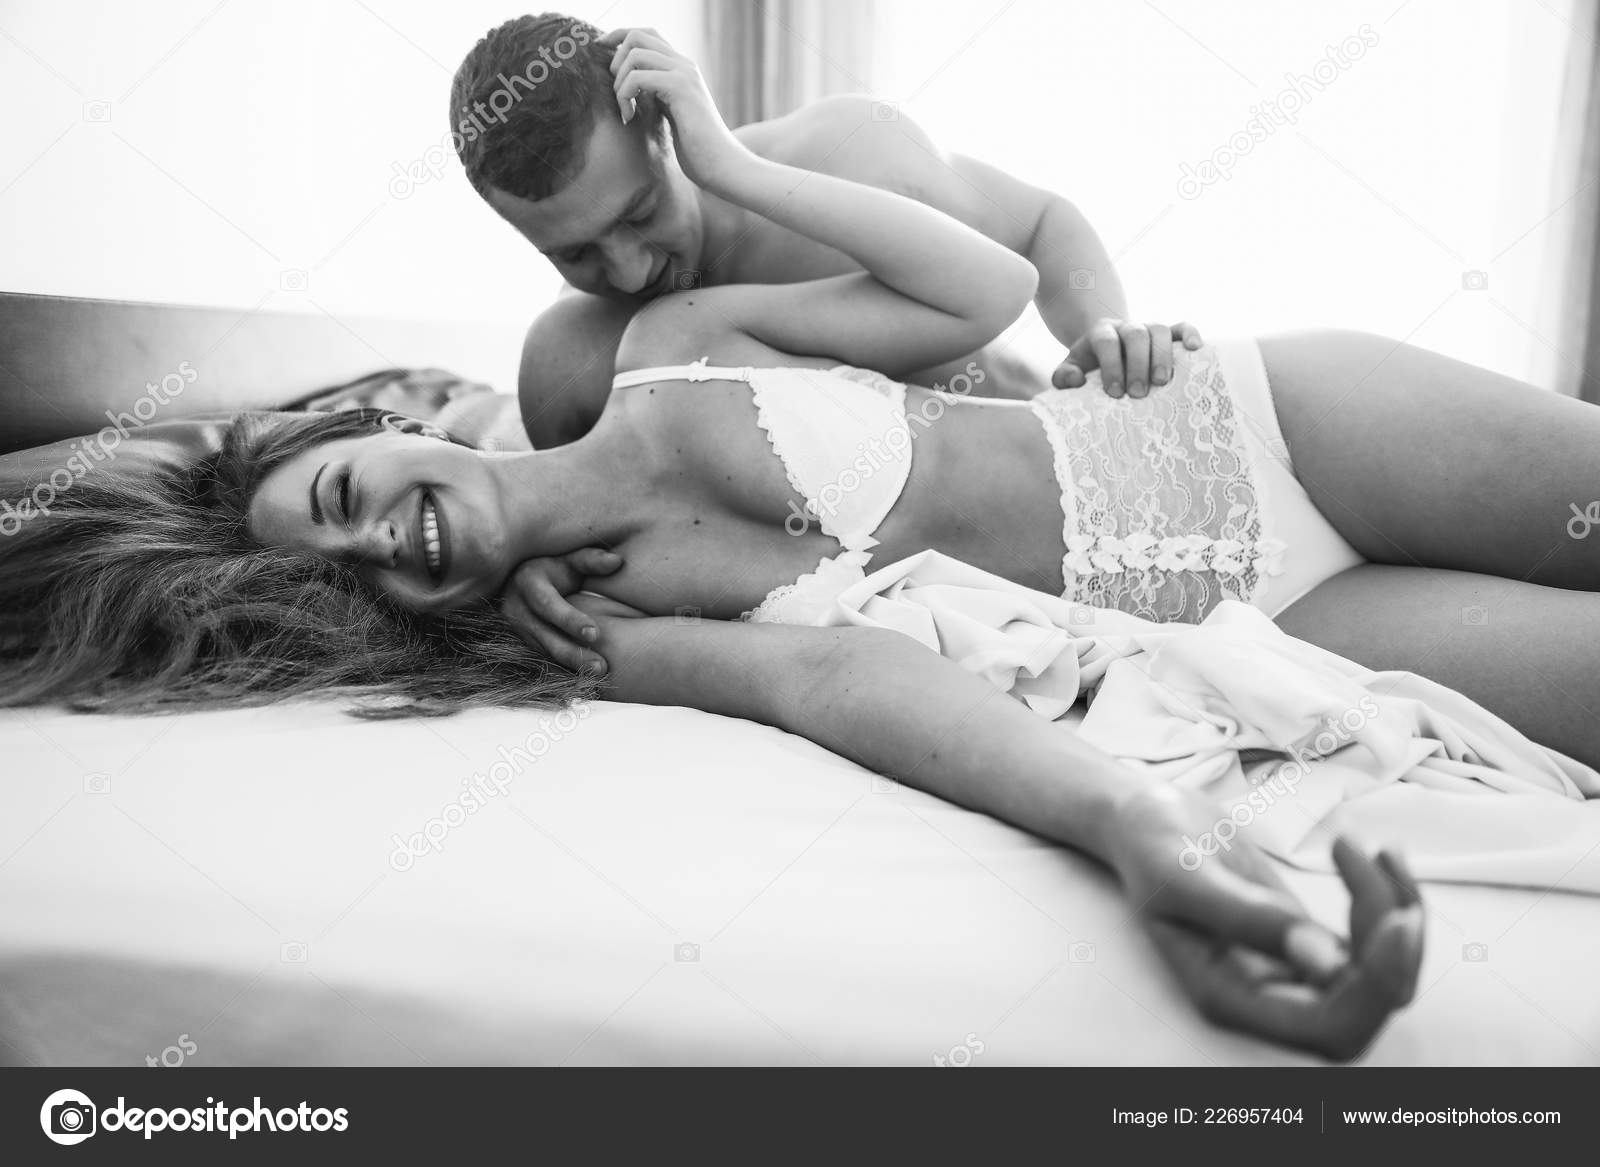 Black and white sexual images